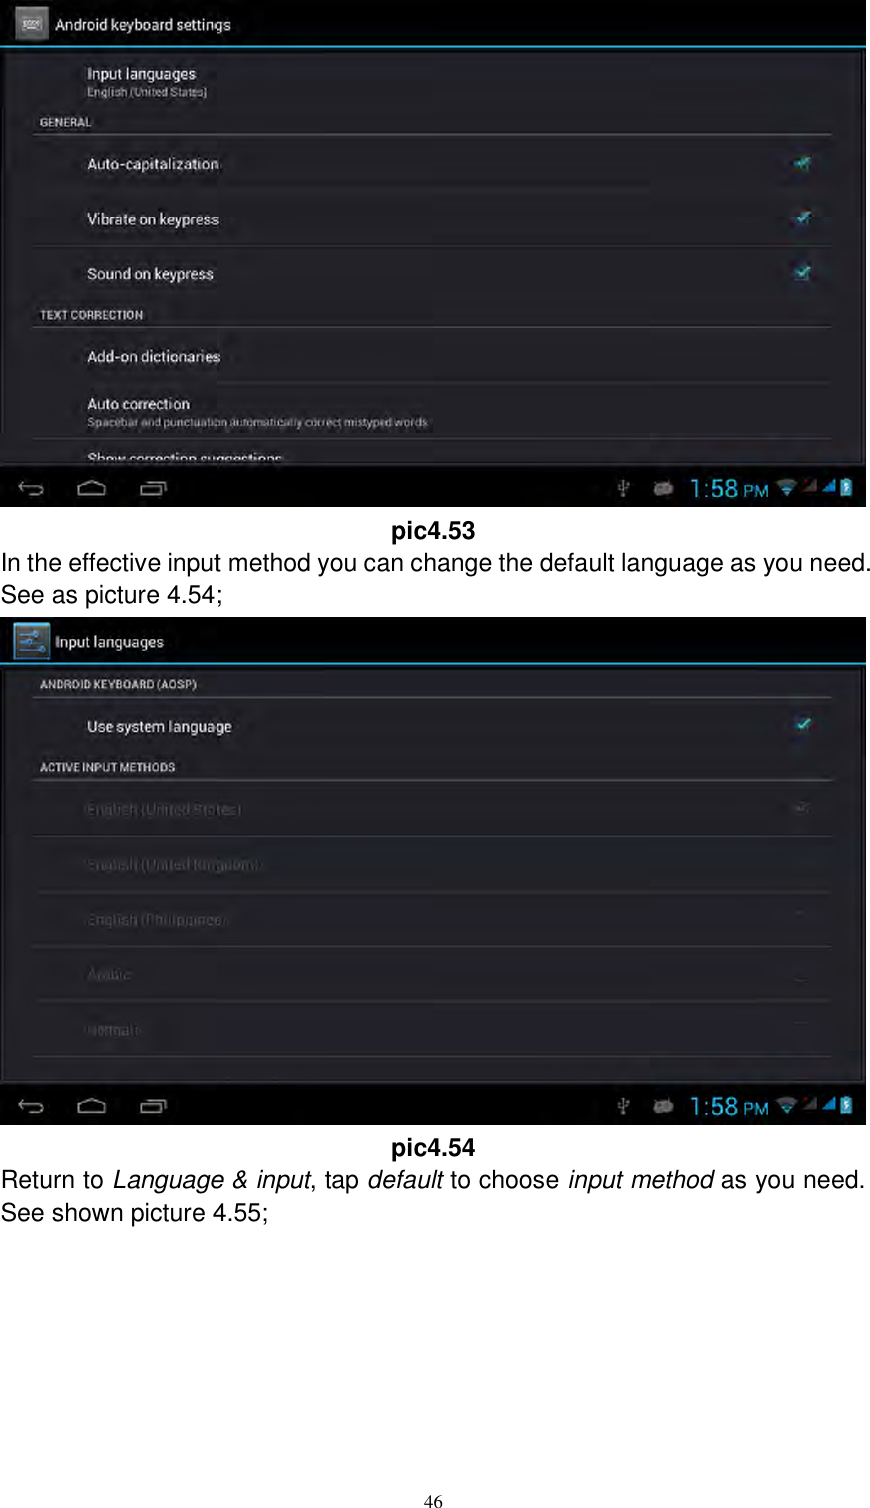      46  pic4.53 In the effective input method you can change the default language as you need. See as picture 4.54;  pic4.54 Return to Language &amp; input, tap default to choose input method as you need. See shown picture 4.55; 